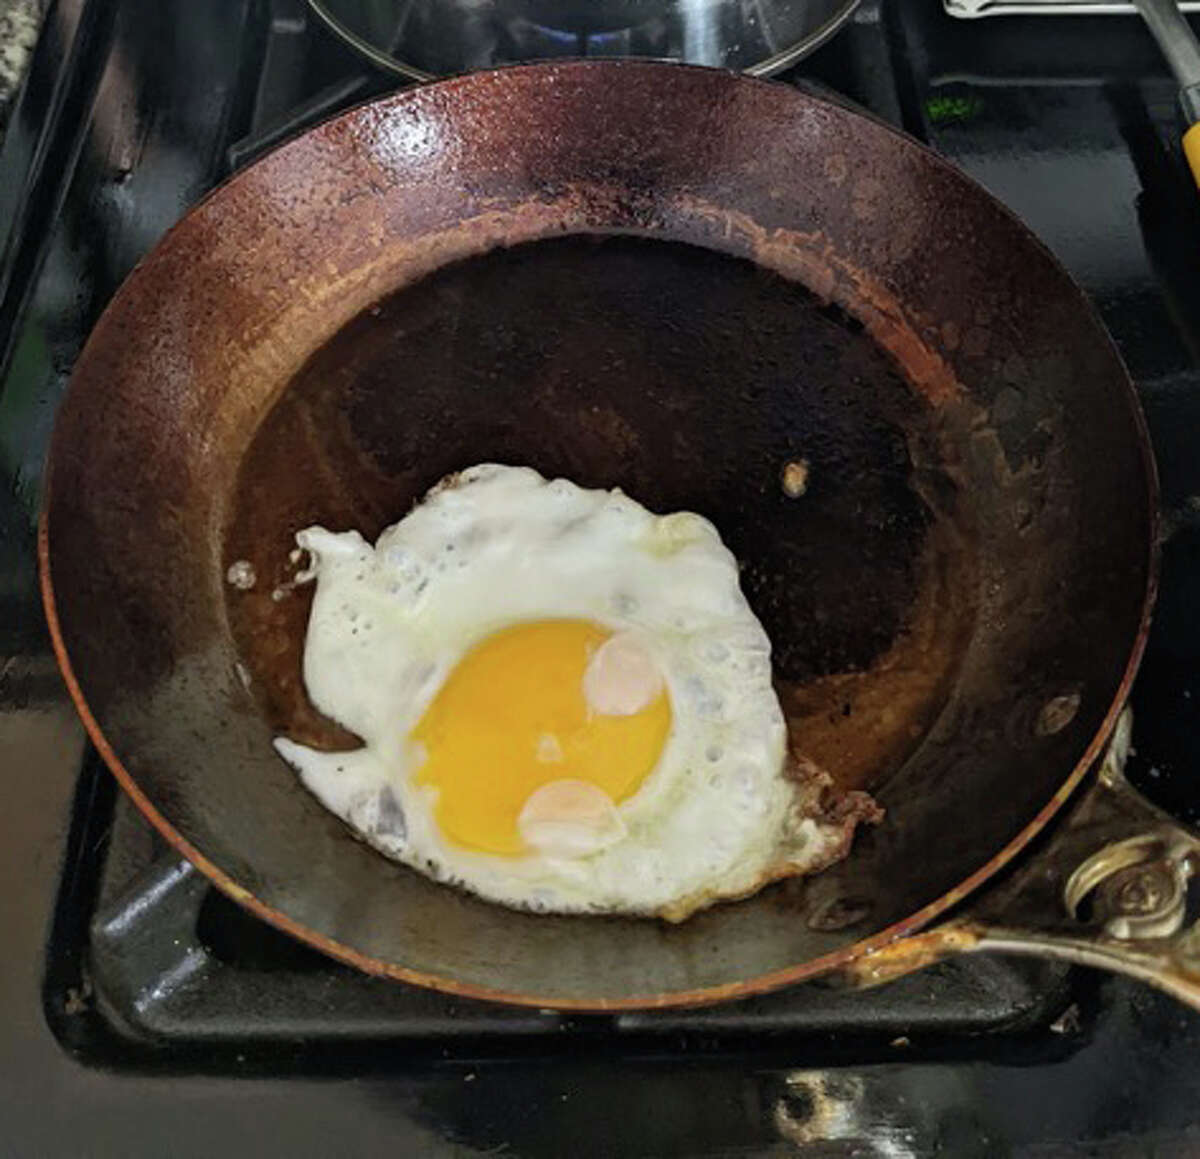 Fried eggs are a bit of a glove for any pan